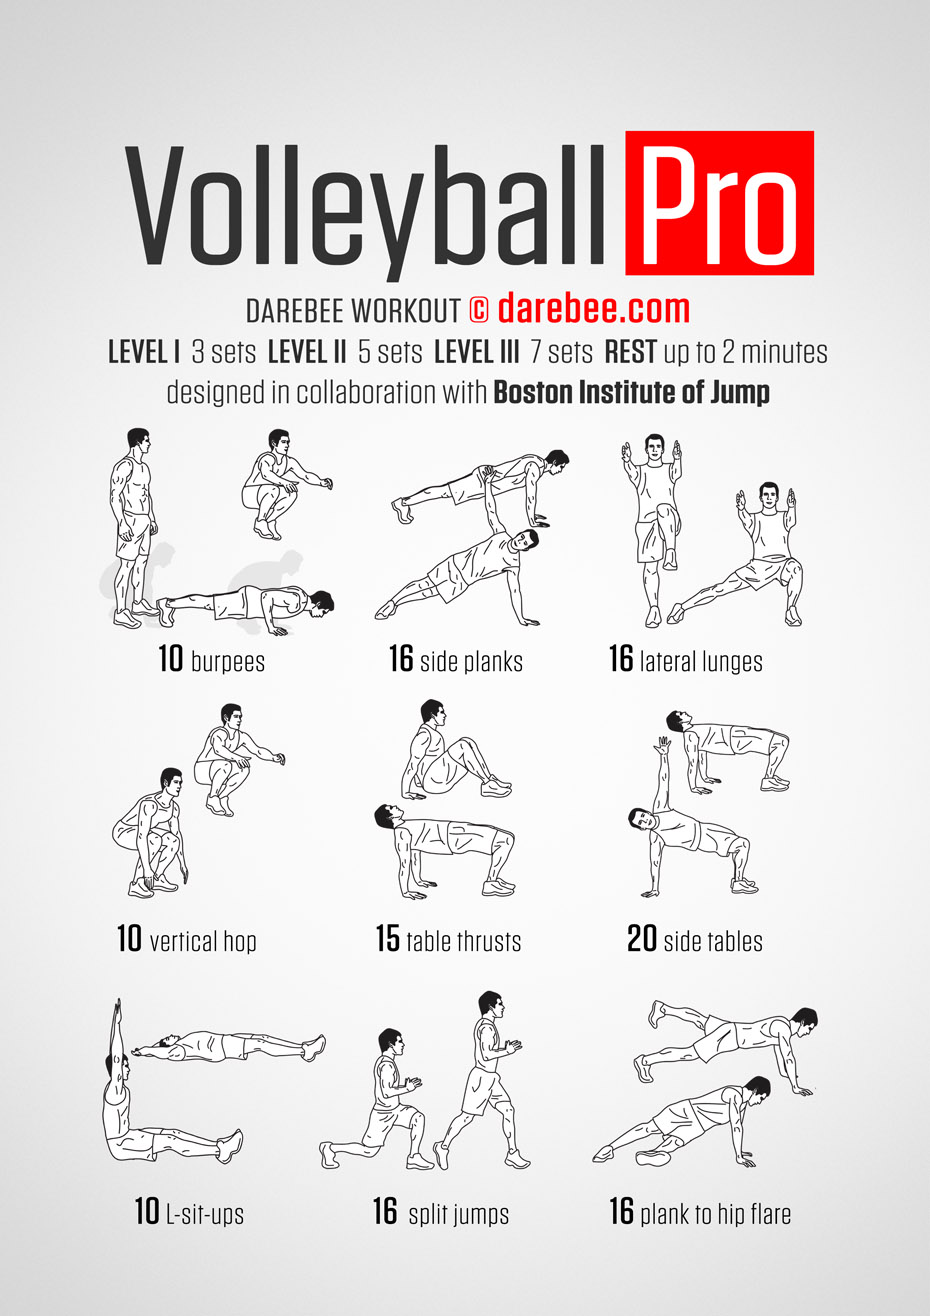 17 15 Minute Volleyball workout plan at home for Girls